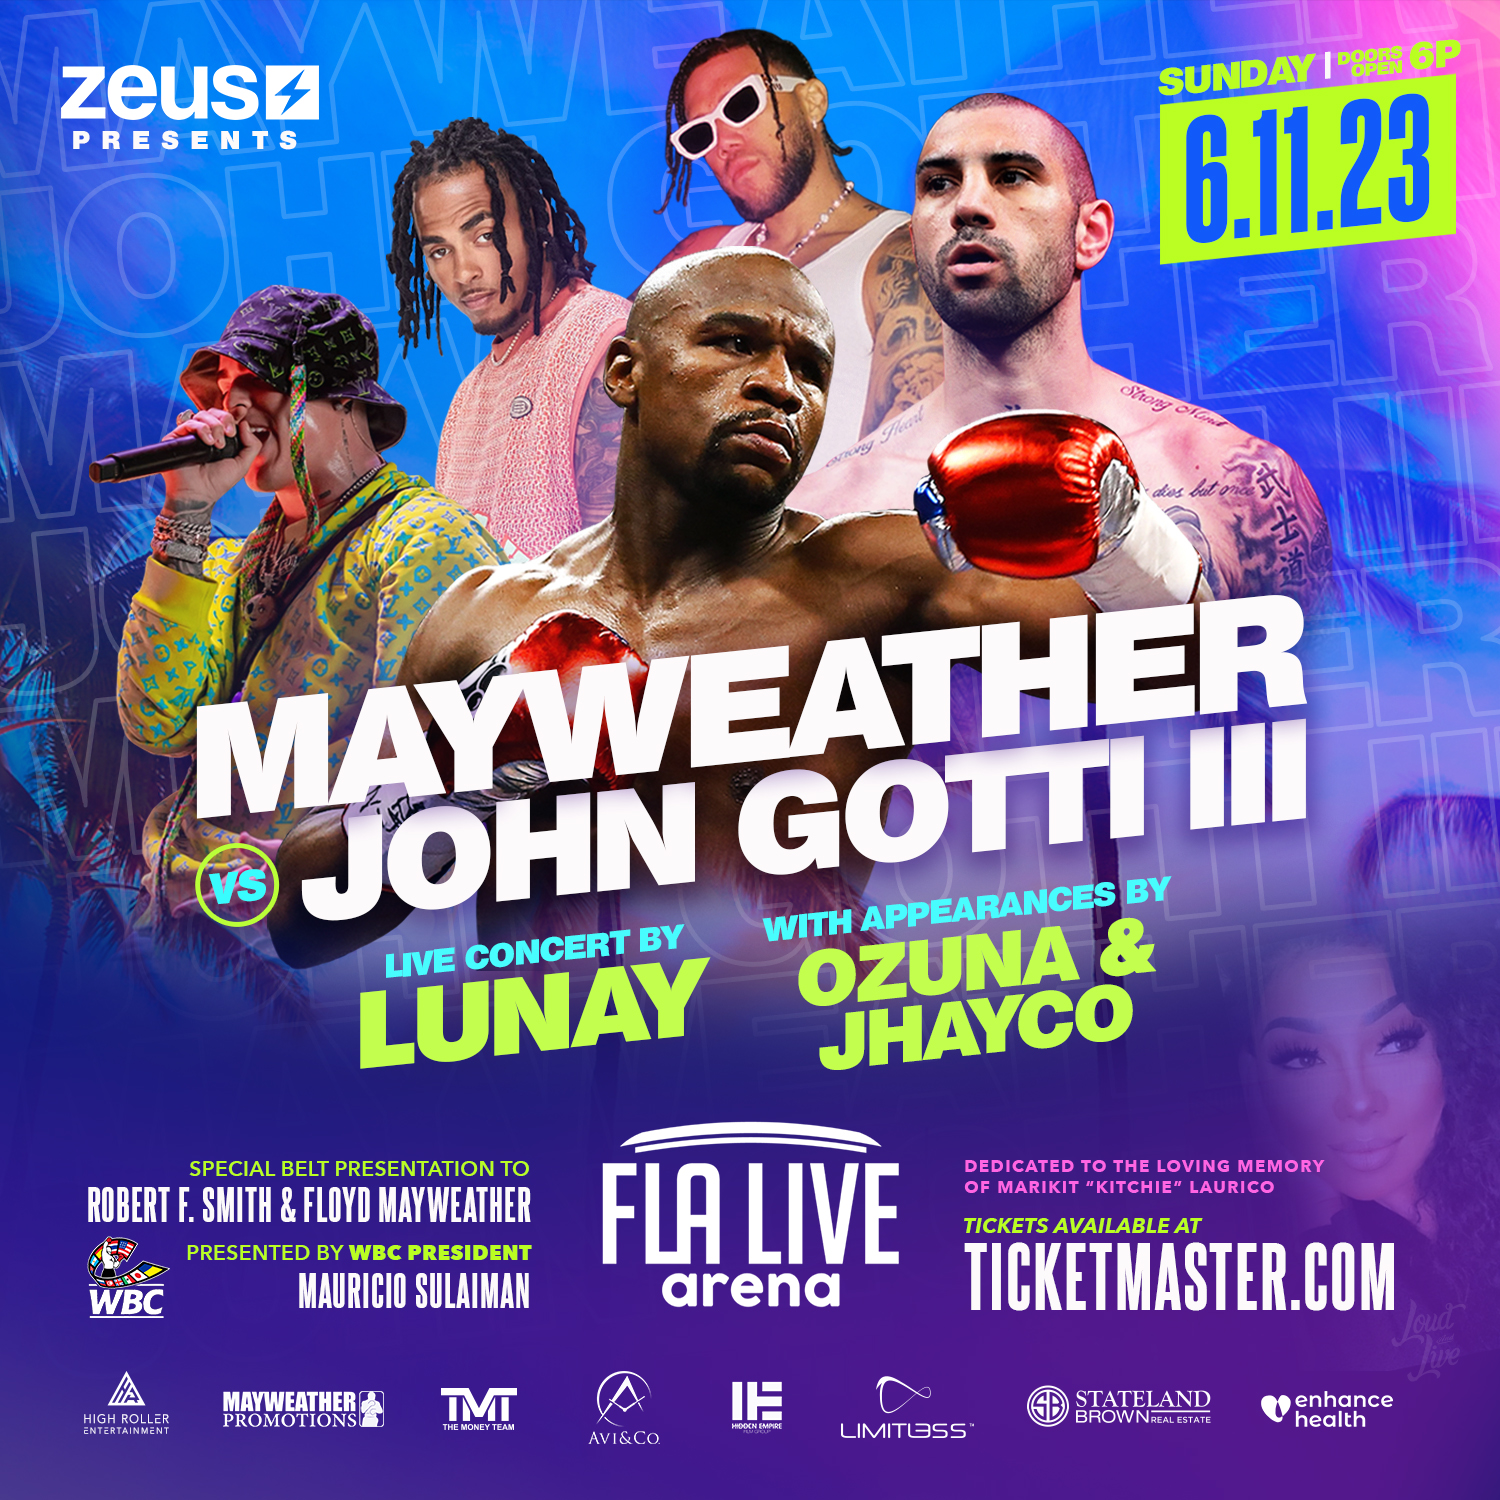 MAYWEATHER AND GOTTI III TO FACE OFF IN HIGHLY ANTICIPATED EXHIBITION FIGHT WITH ALL-STAR MUSICAL GUESTS ON JUNE 11